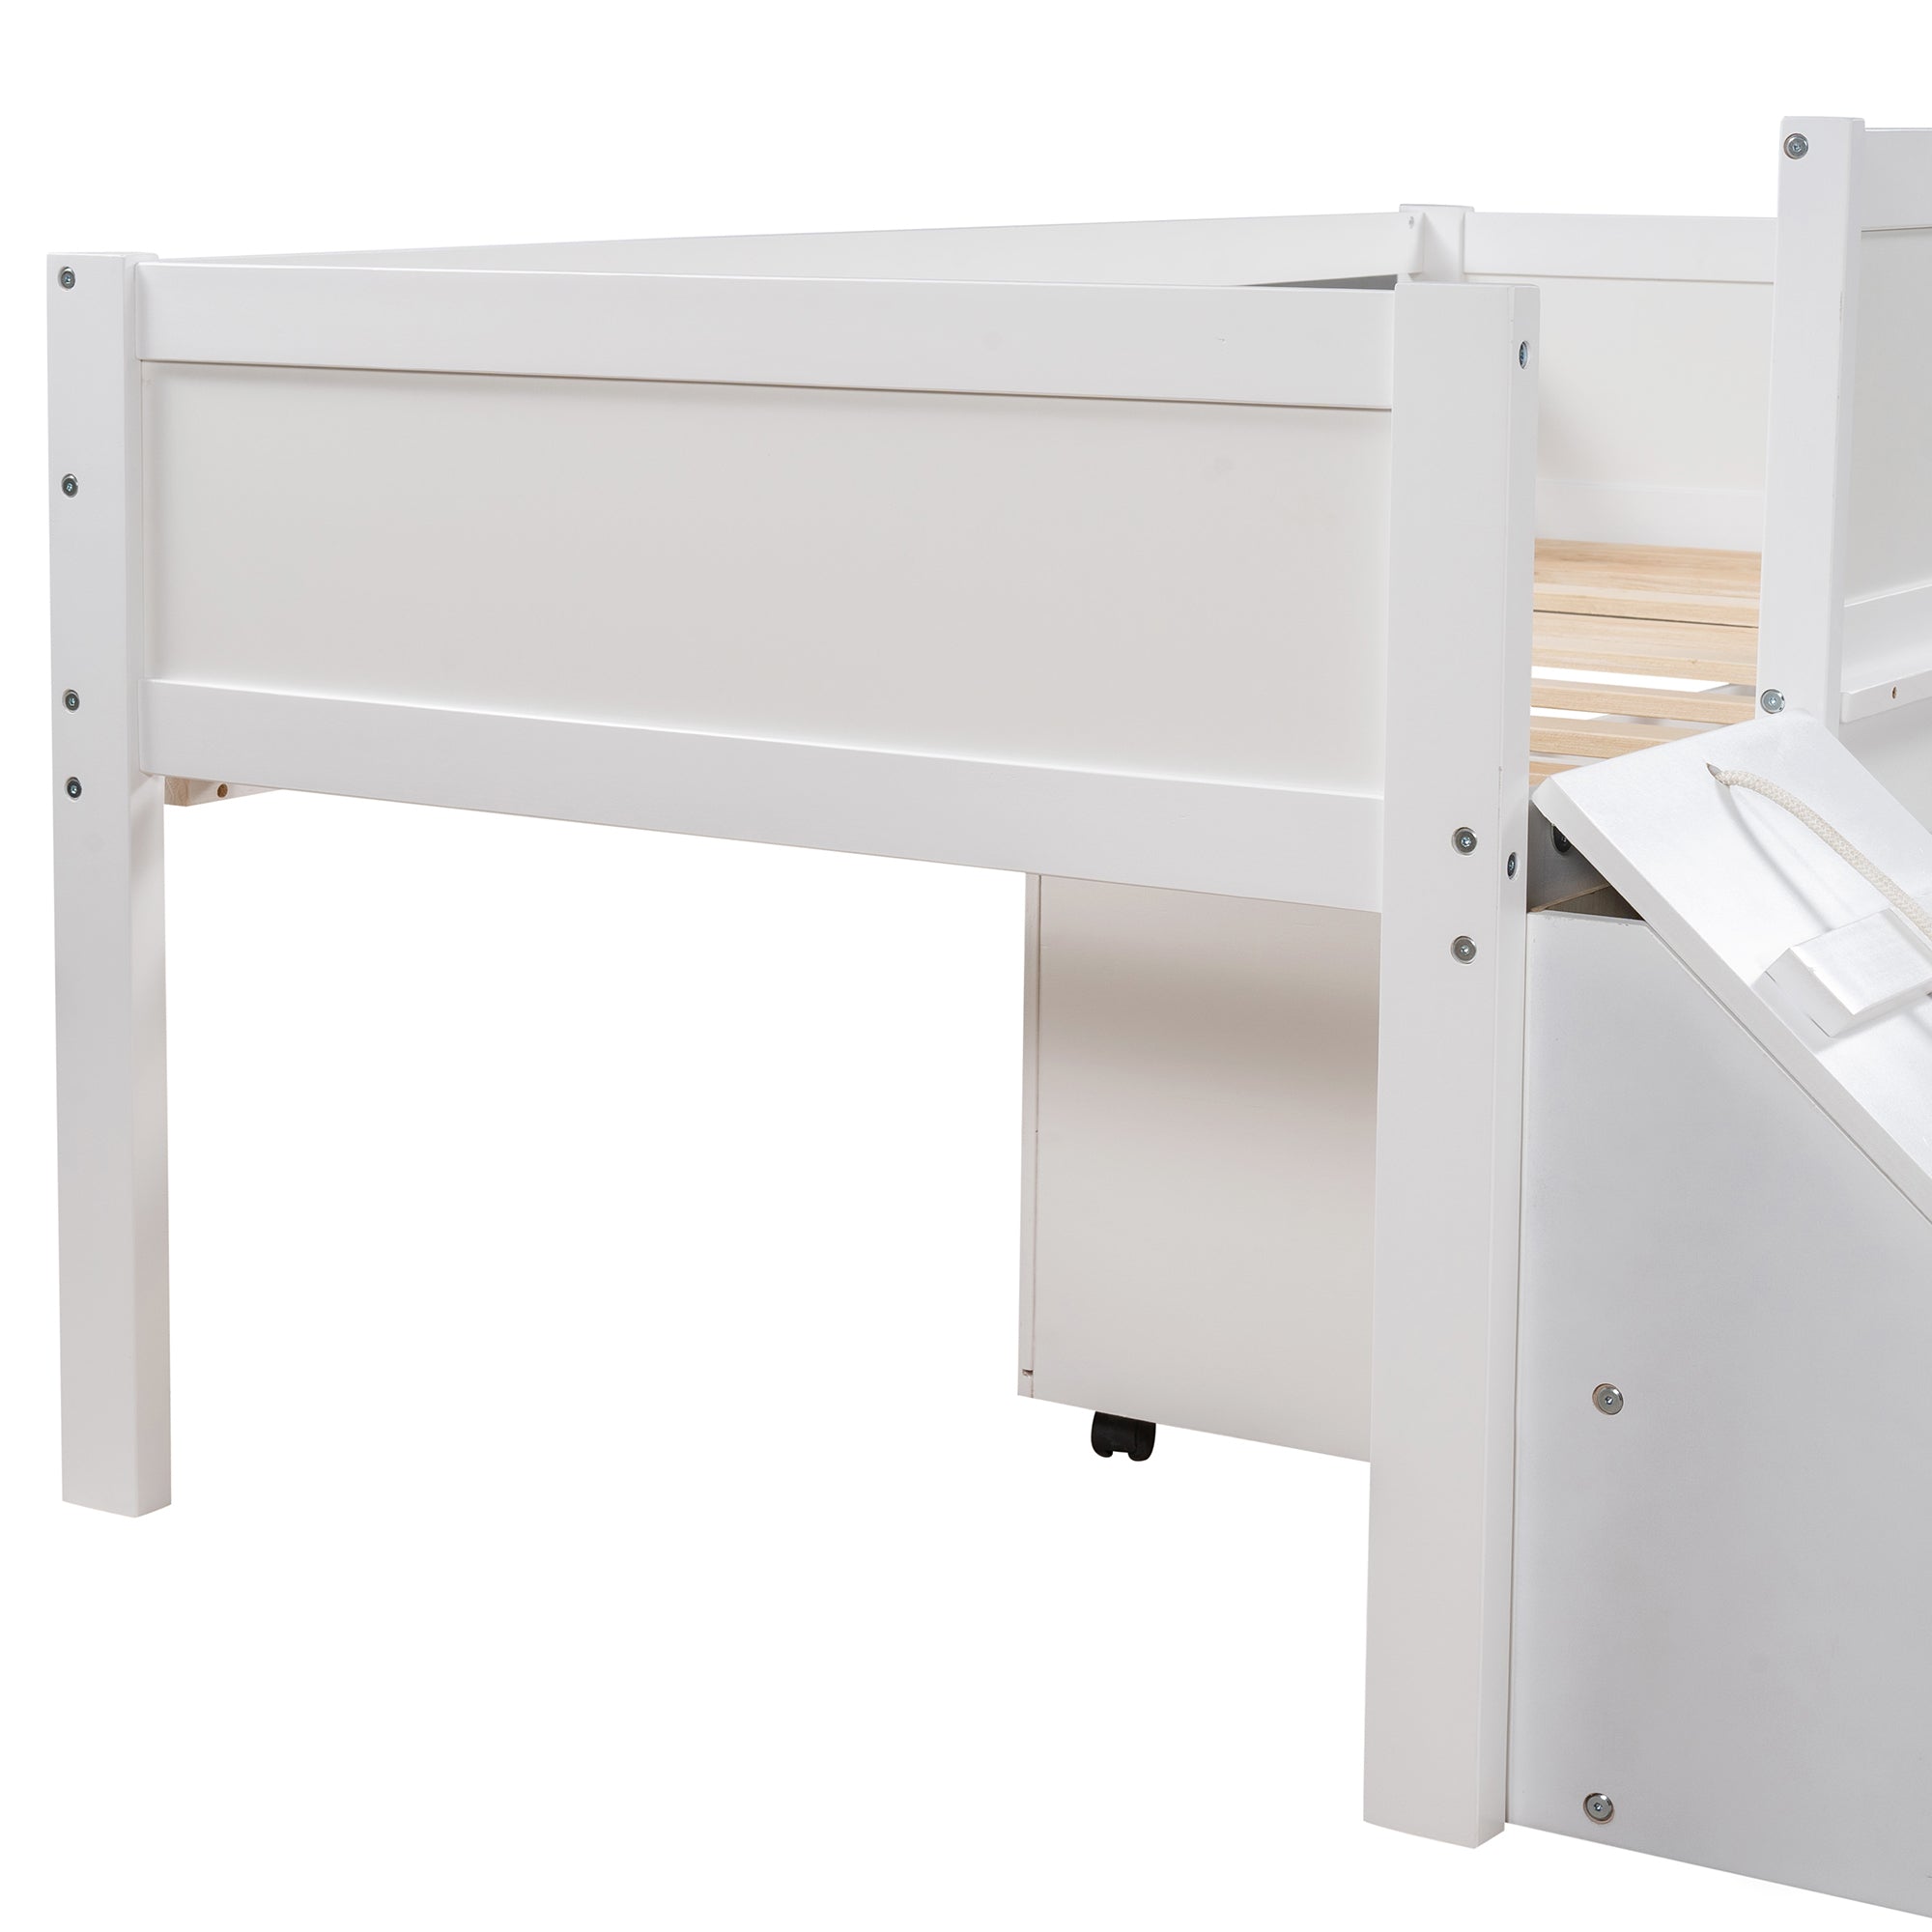 Twin size Low Loft Bed Wooden Bed with Two Storage Boxe (White)